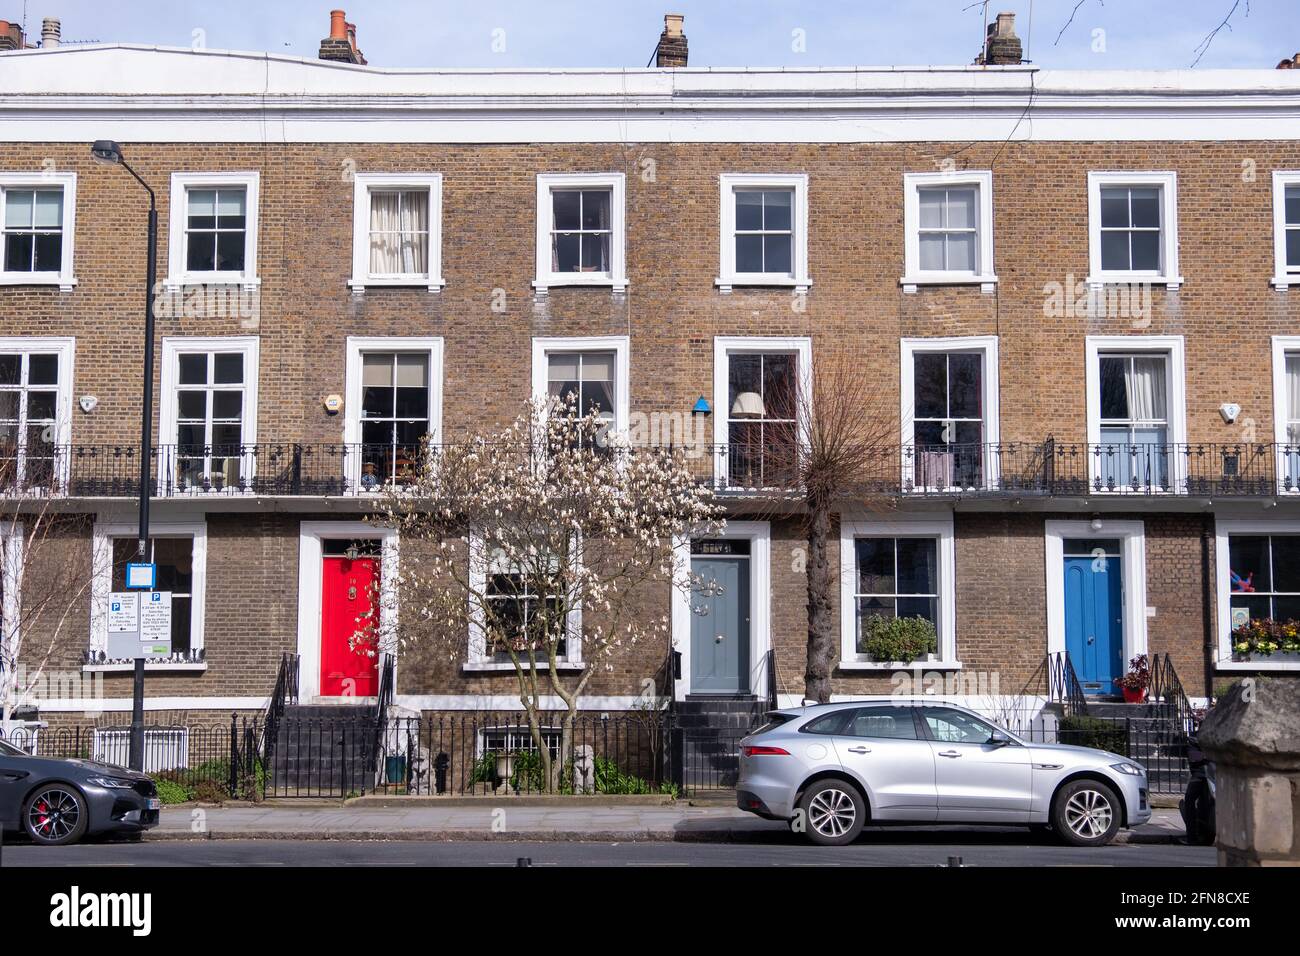 London- May 2021: Residential street of west London townhouses Stock Photo